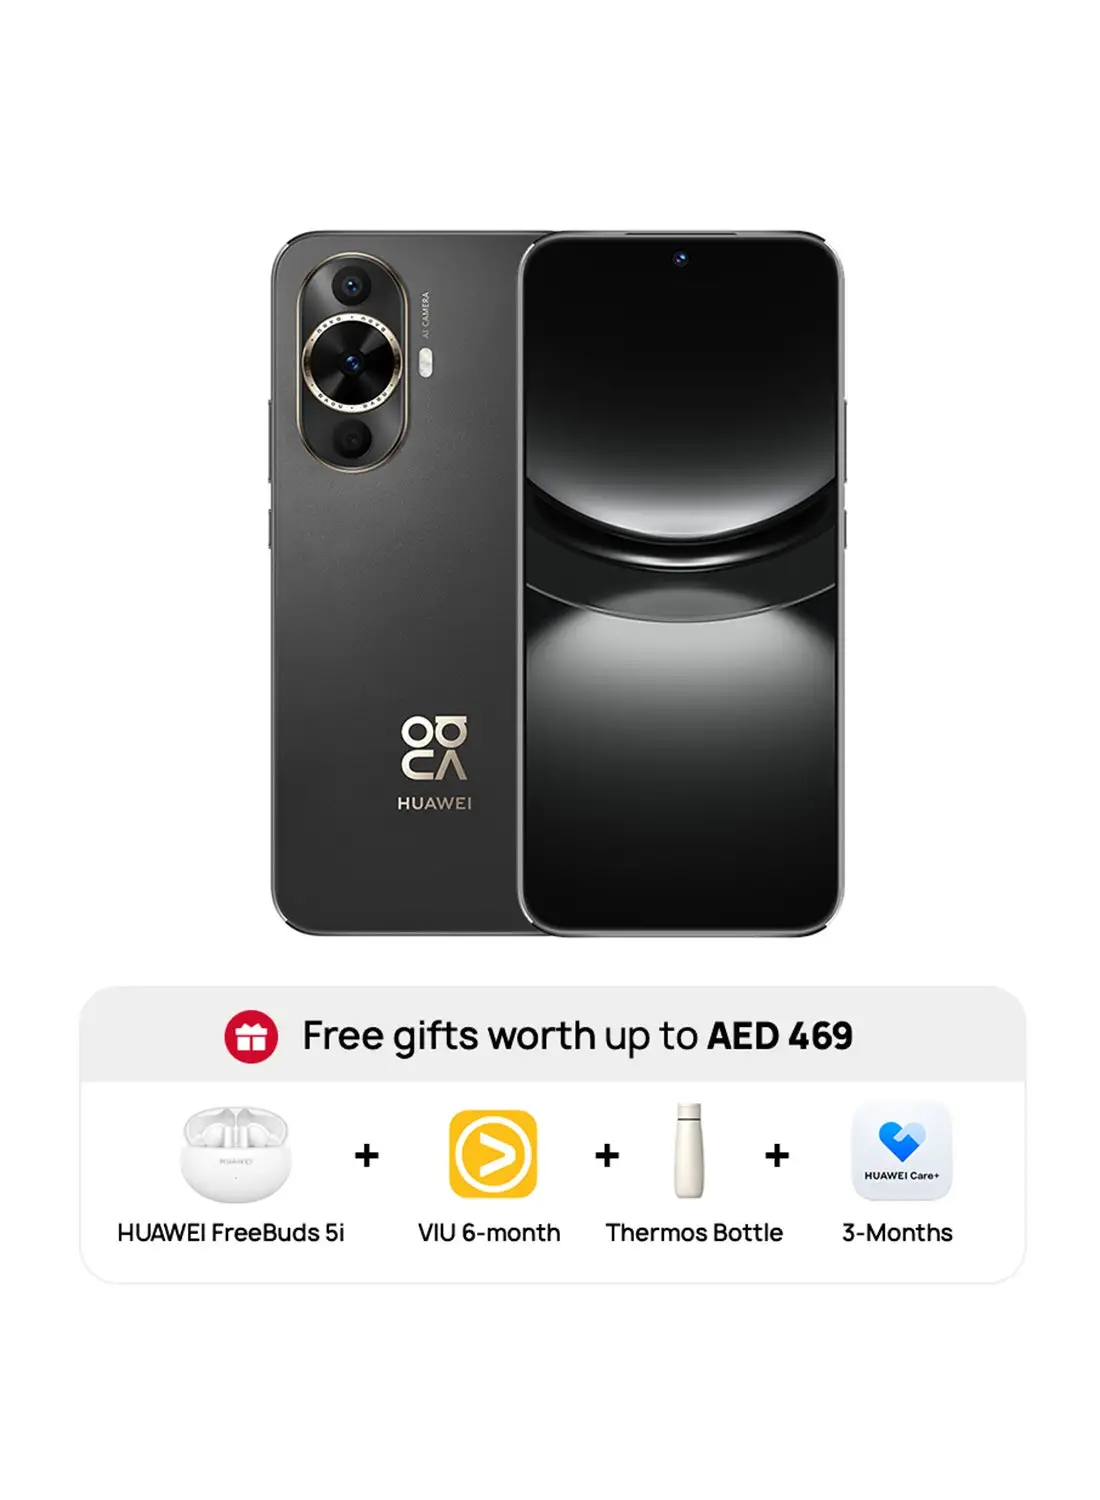 HUAWEI Nova 12S Dual SIM Black 8GB RAM 256GB 4G LTE With FB5i + 6 Months VIU + Thermos Bottle + 3 Months Huawei Care+ Worth AED 469 - Middle East Version